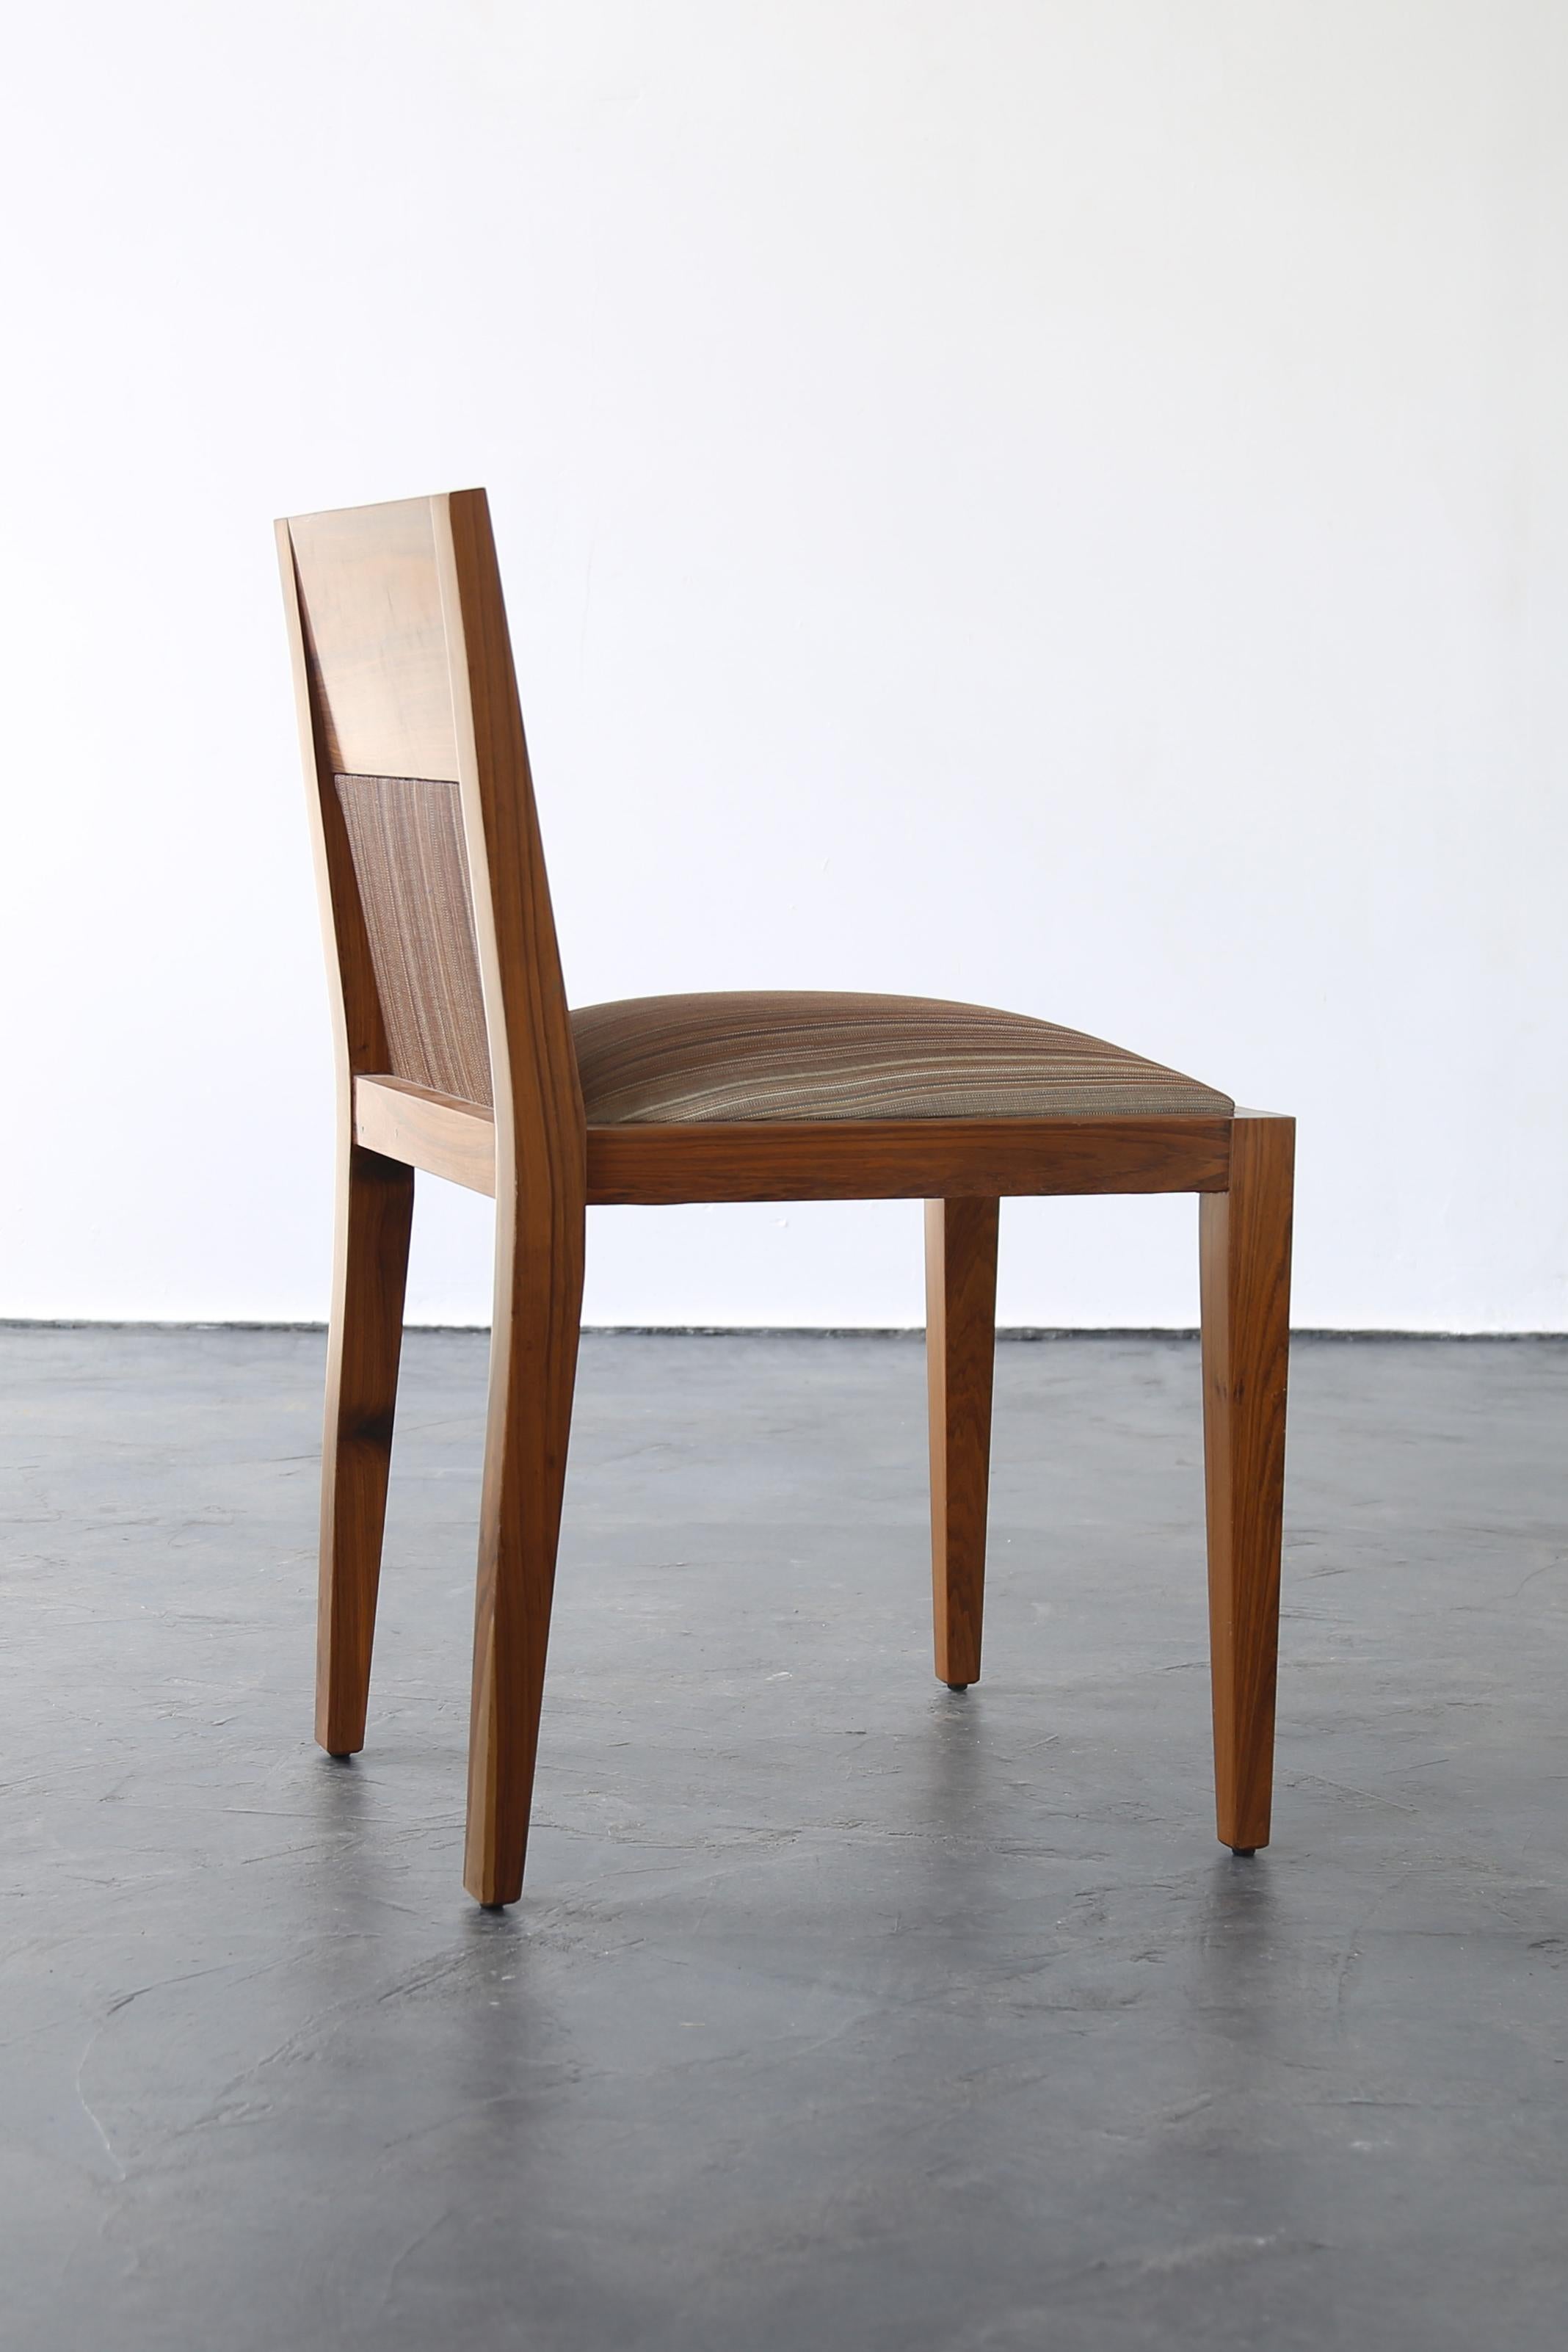 Argentine Contemporary Wood Dining Chair by Costantini, Palermo Hollywood, In Stock For Sale